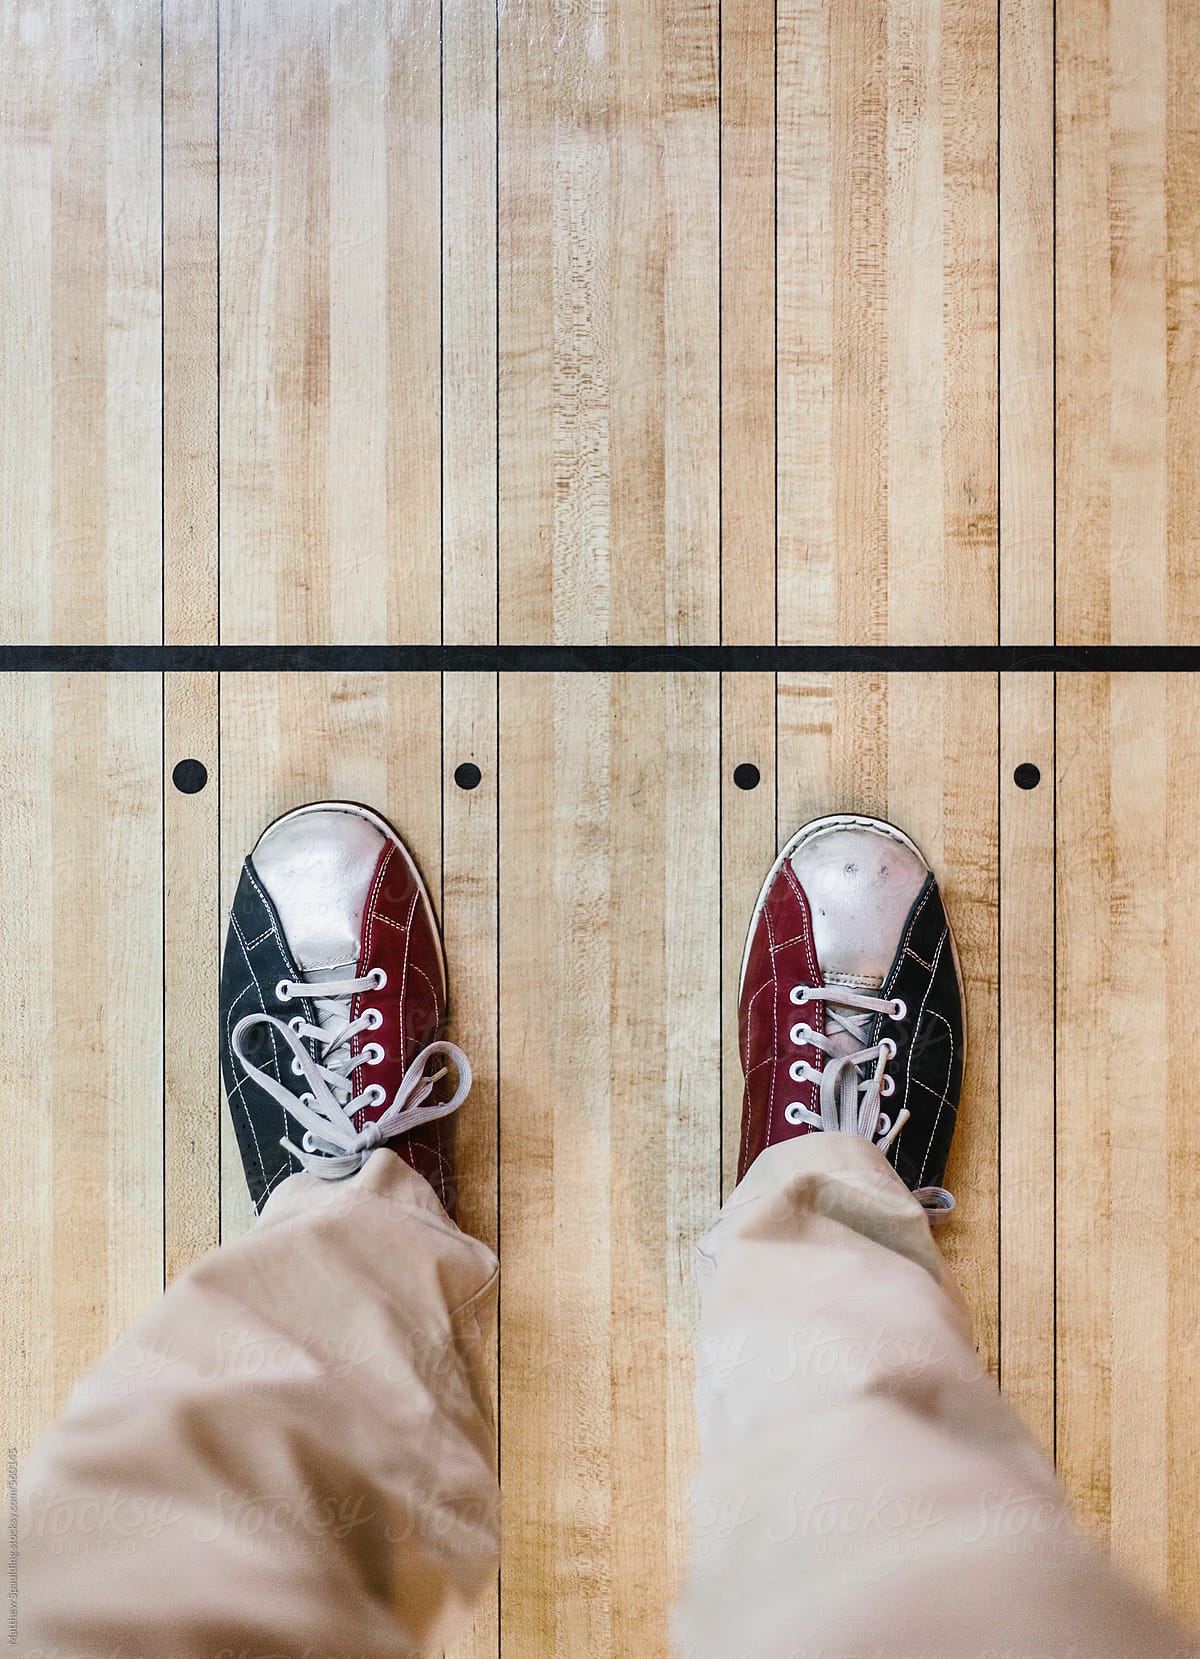 View of bowling shoes on wood floor at alley